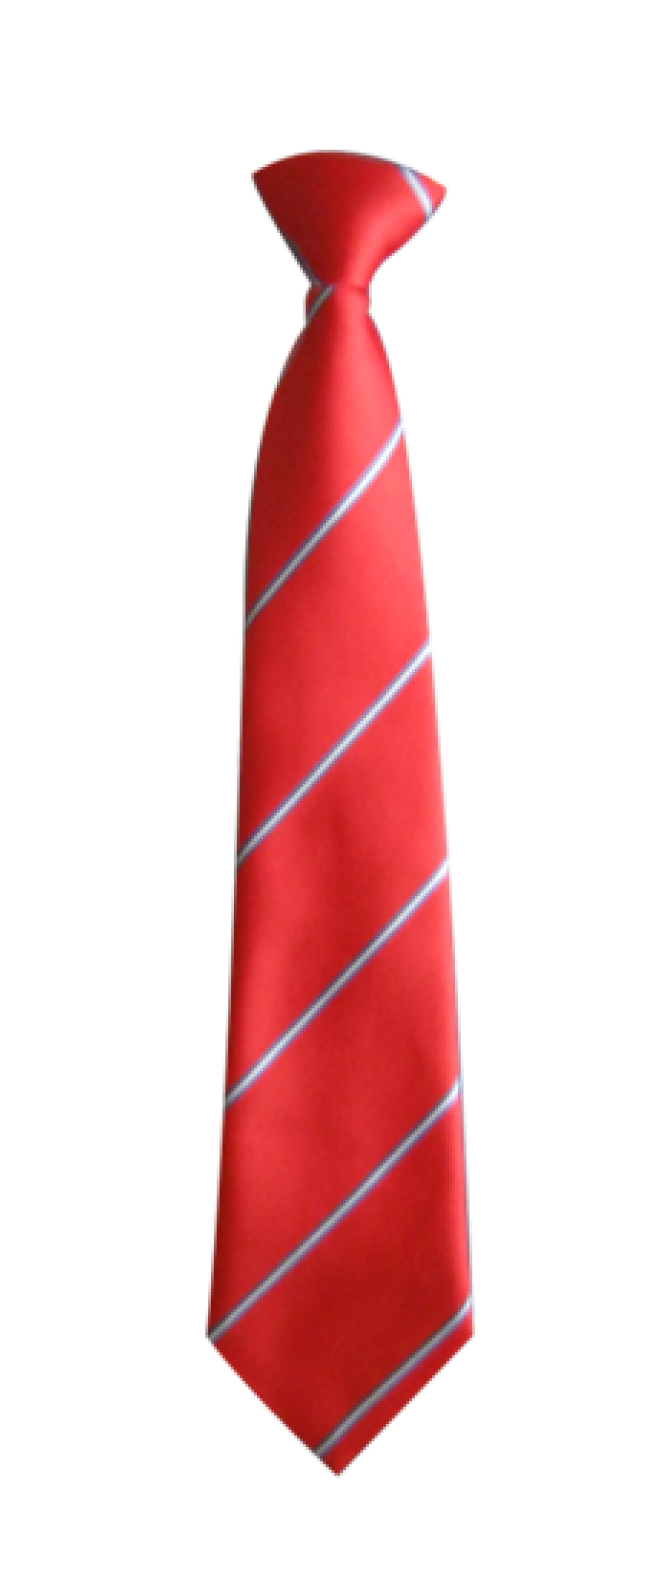 Tie red PNG Image in High Definition pngteam.com